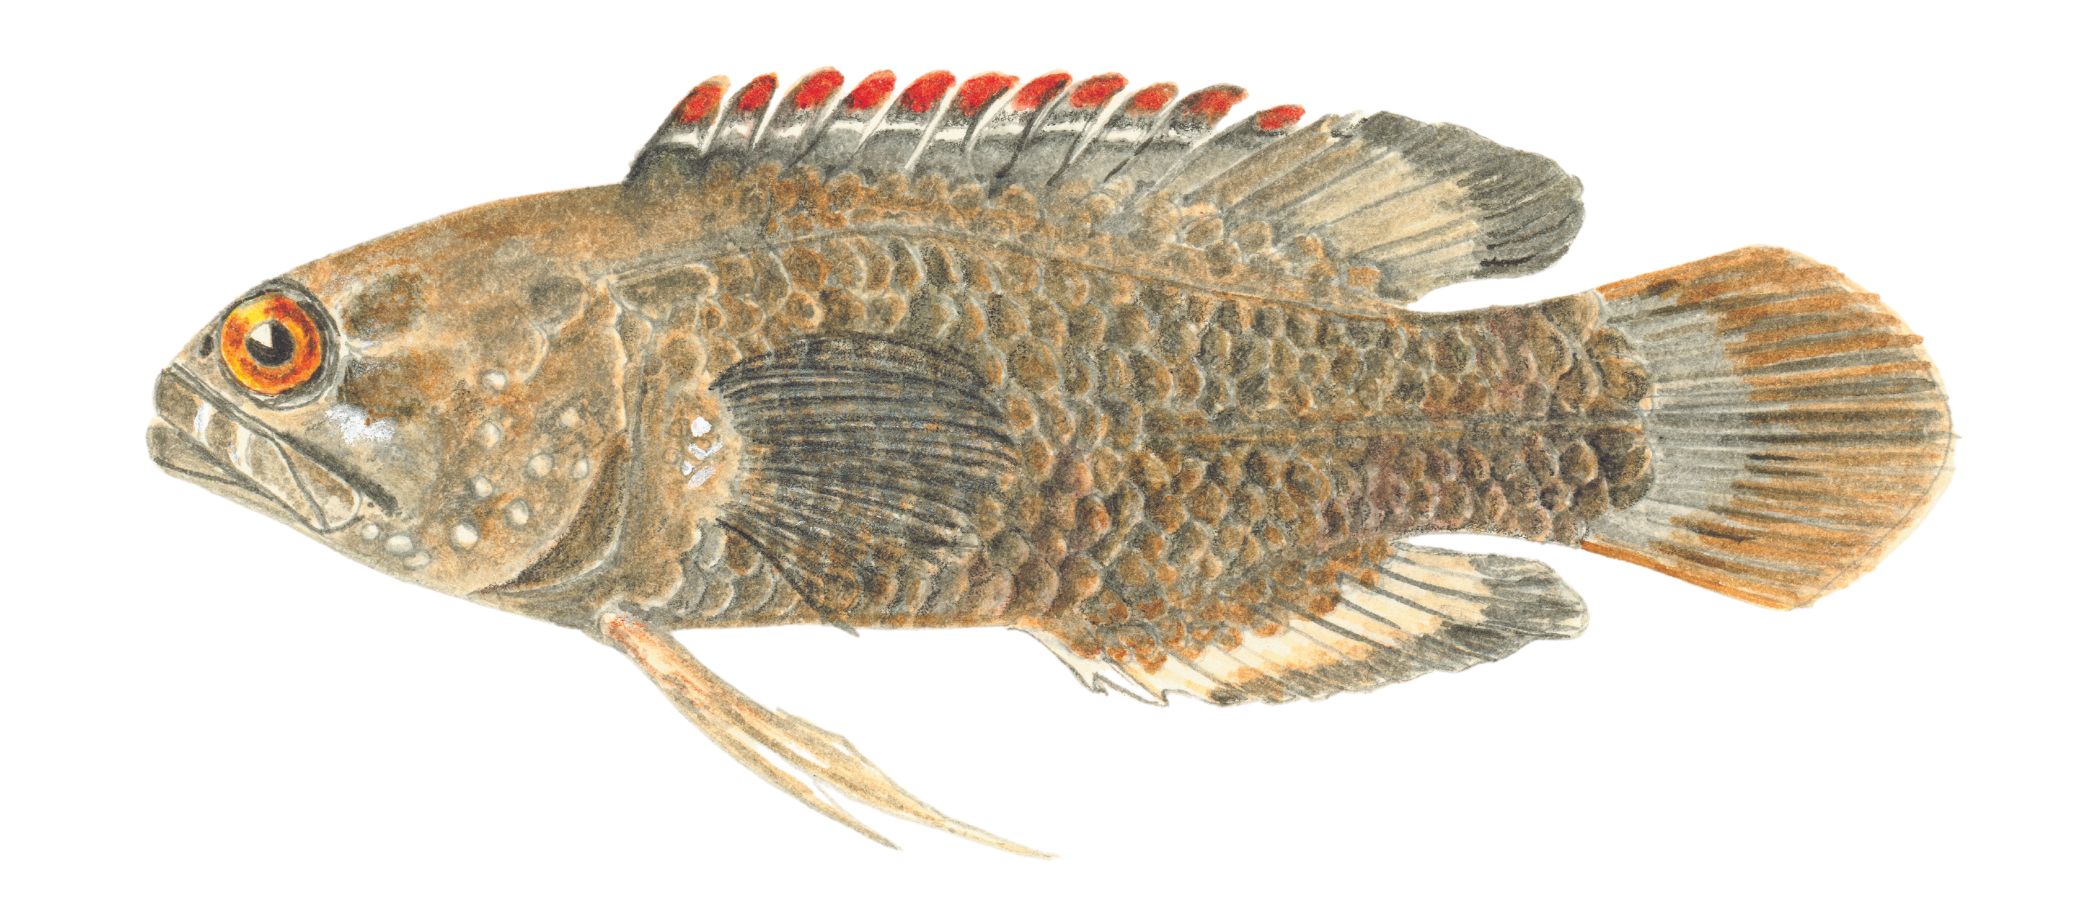 Pencil crayon illustration of a fish grey-beige fish in profile. The upper back fins have reddish-orange tips, and the end of the tail is faintly orange.